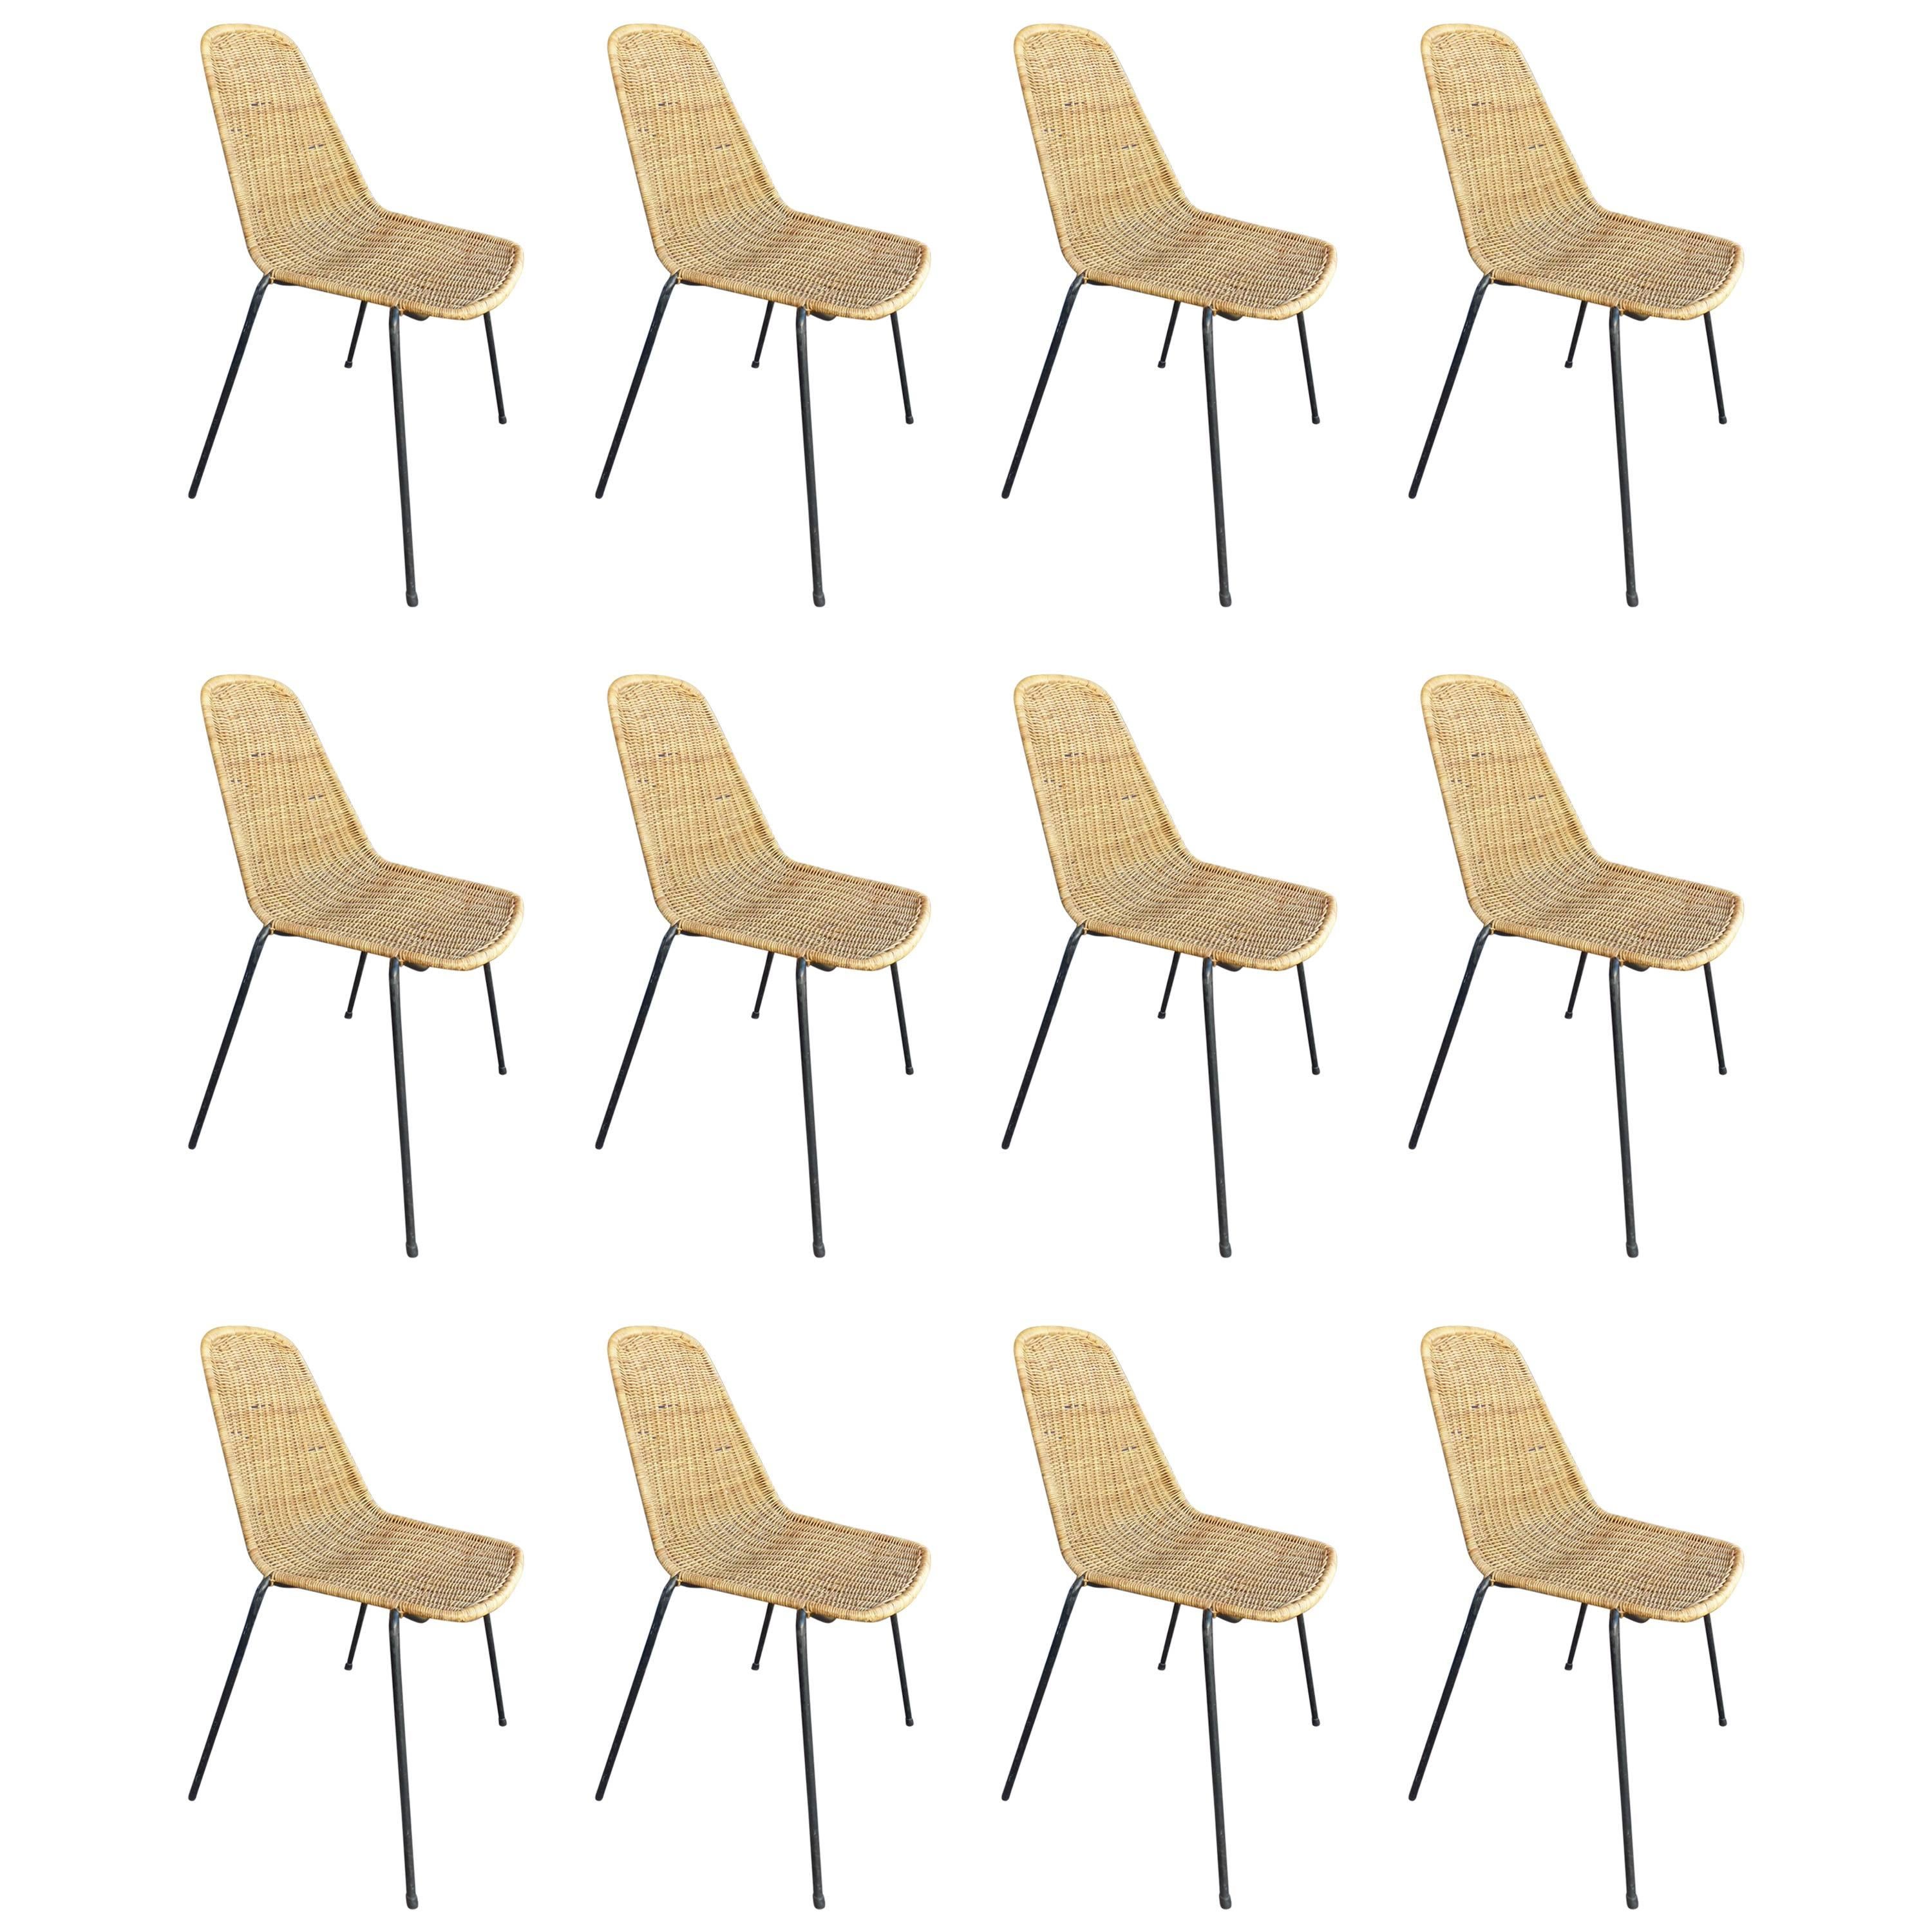 Huge Set of 12 Campo and Graffi Wicker Chair, circa 1960